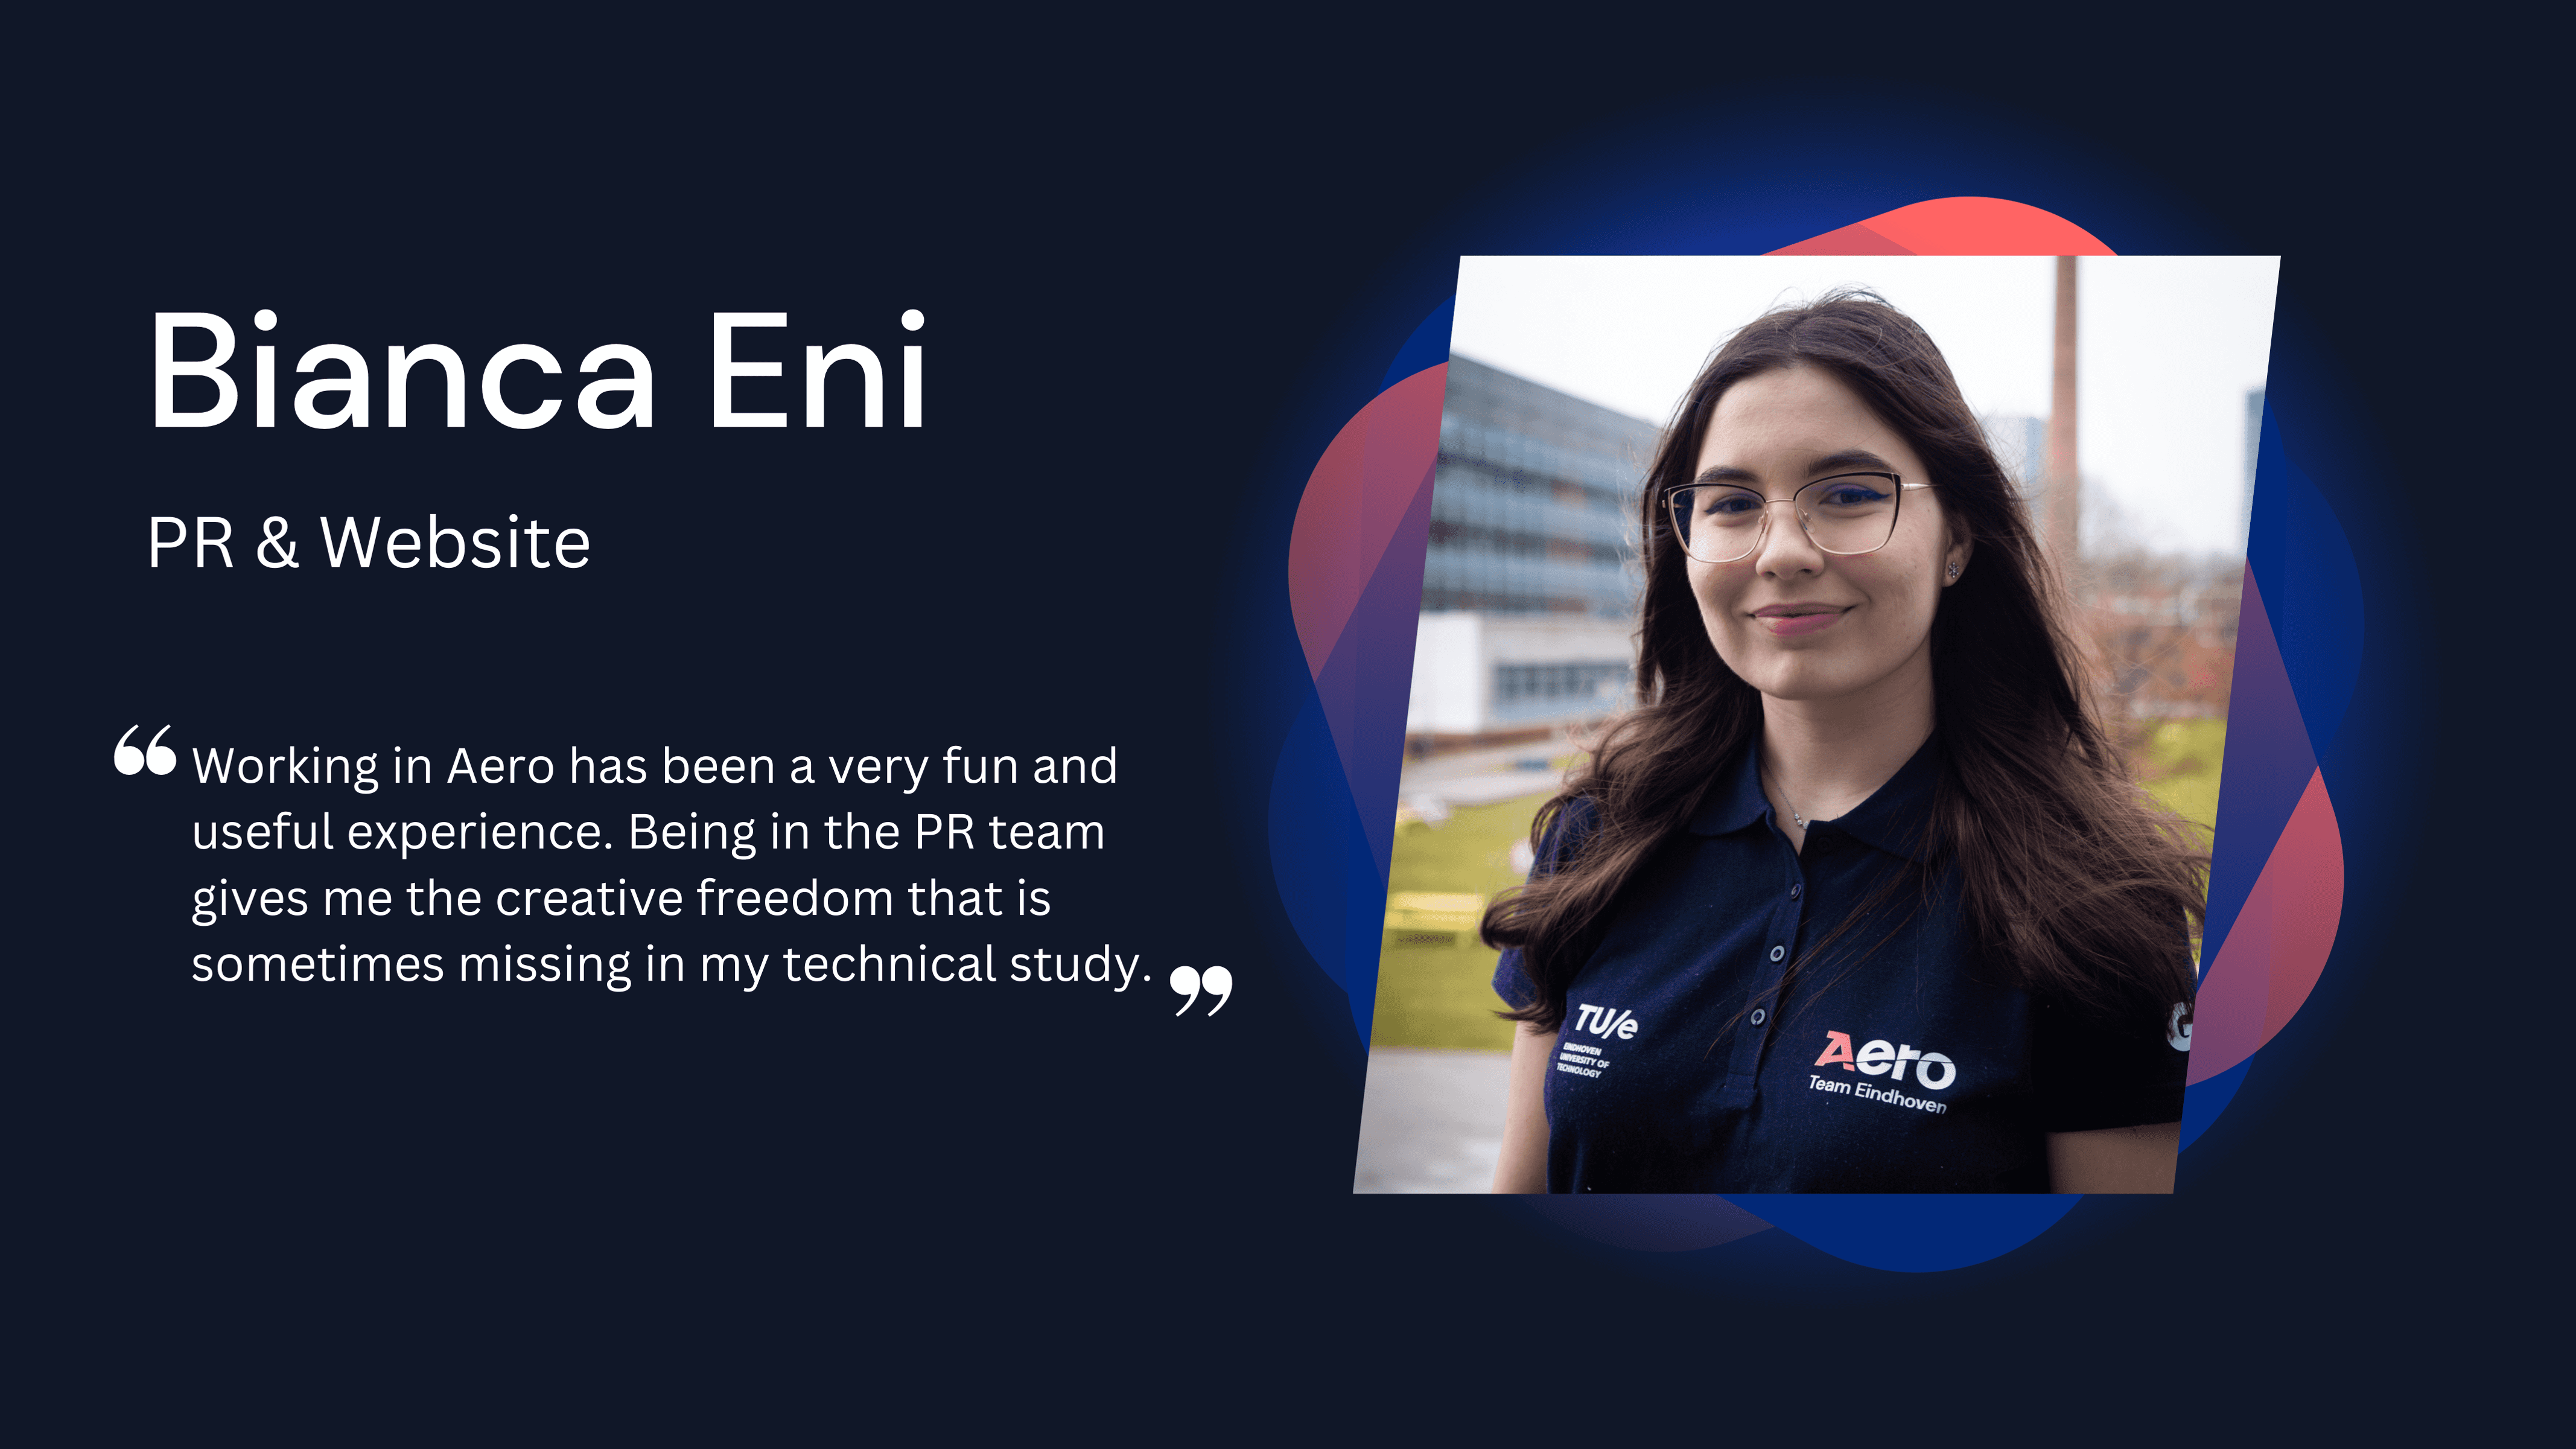 Quote from Bianca Eni: Working in Aero has been a very fun and useful experience. Being in the PR team gives me the creative freedom that is sometimes missing in my technical study.